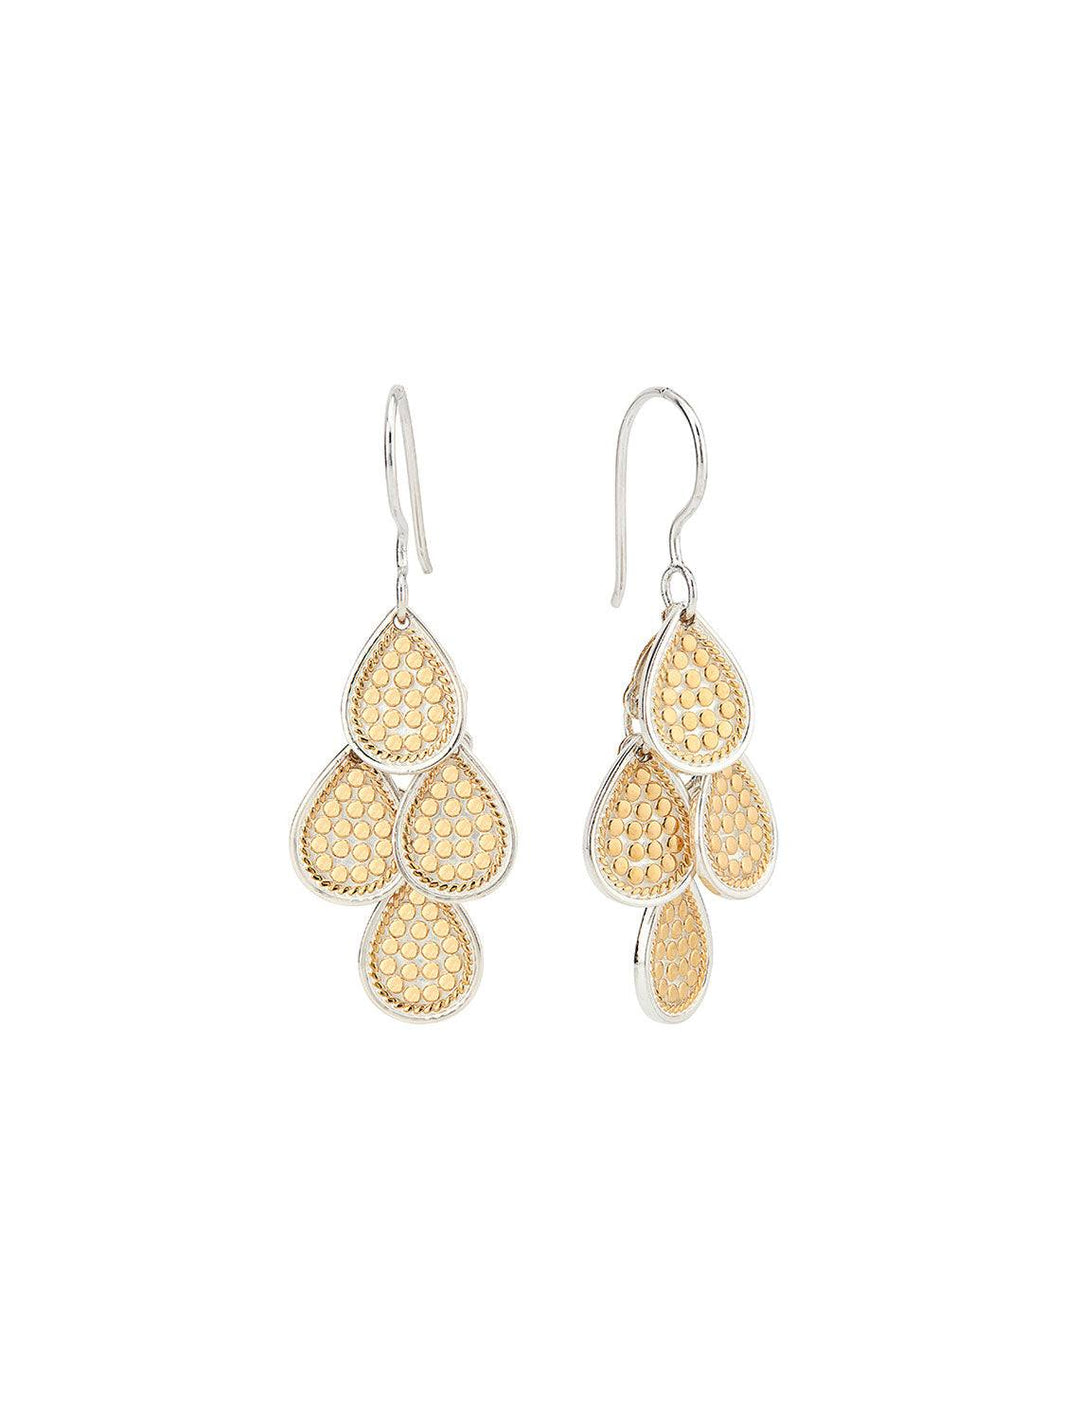 Anna Beck's classic chandelier earrings in two-tone.